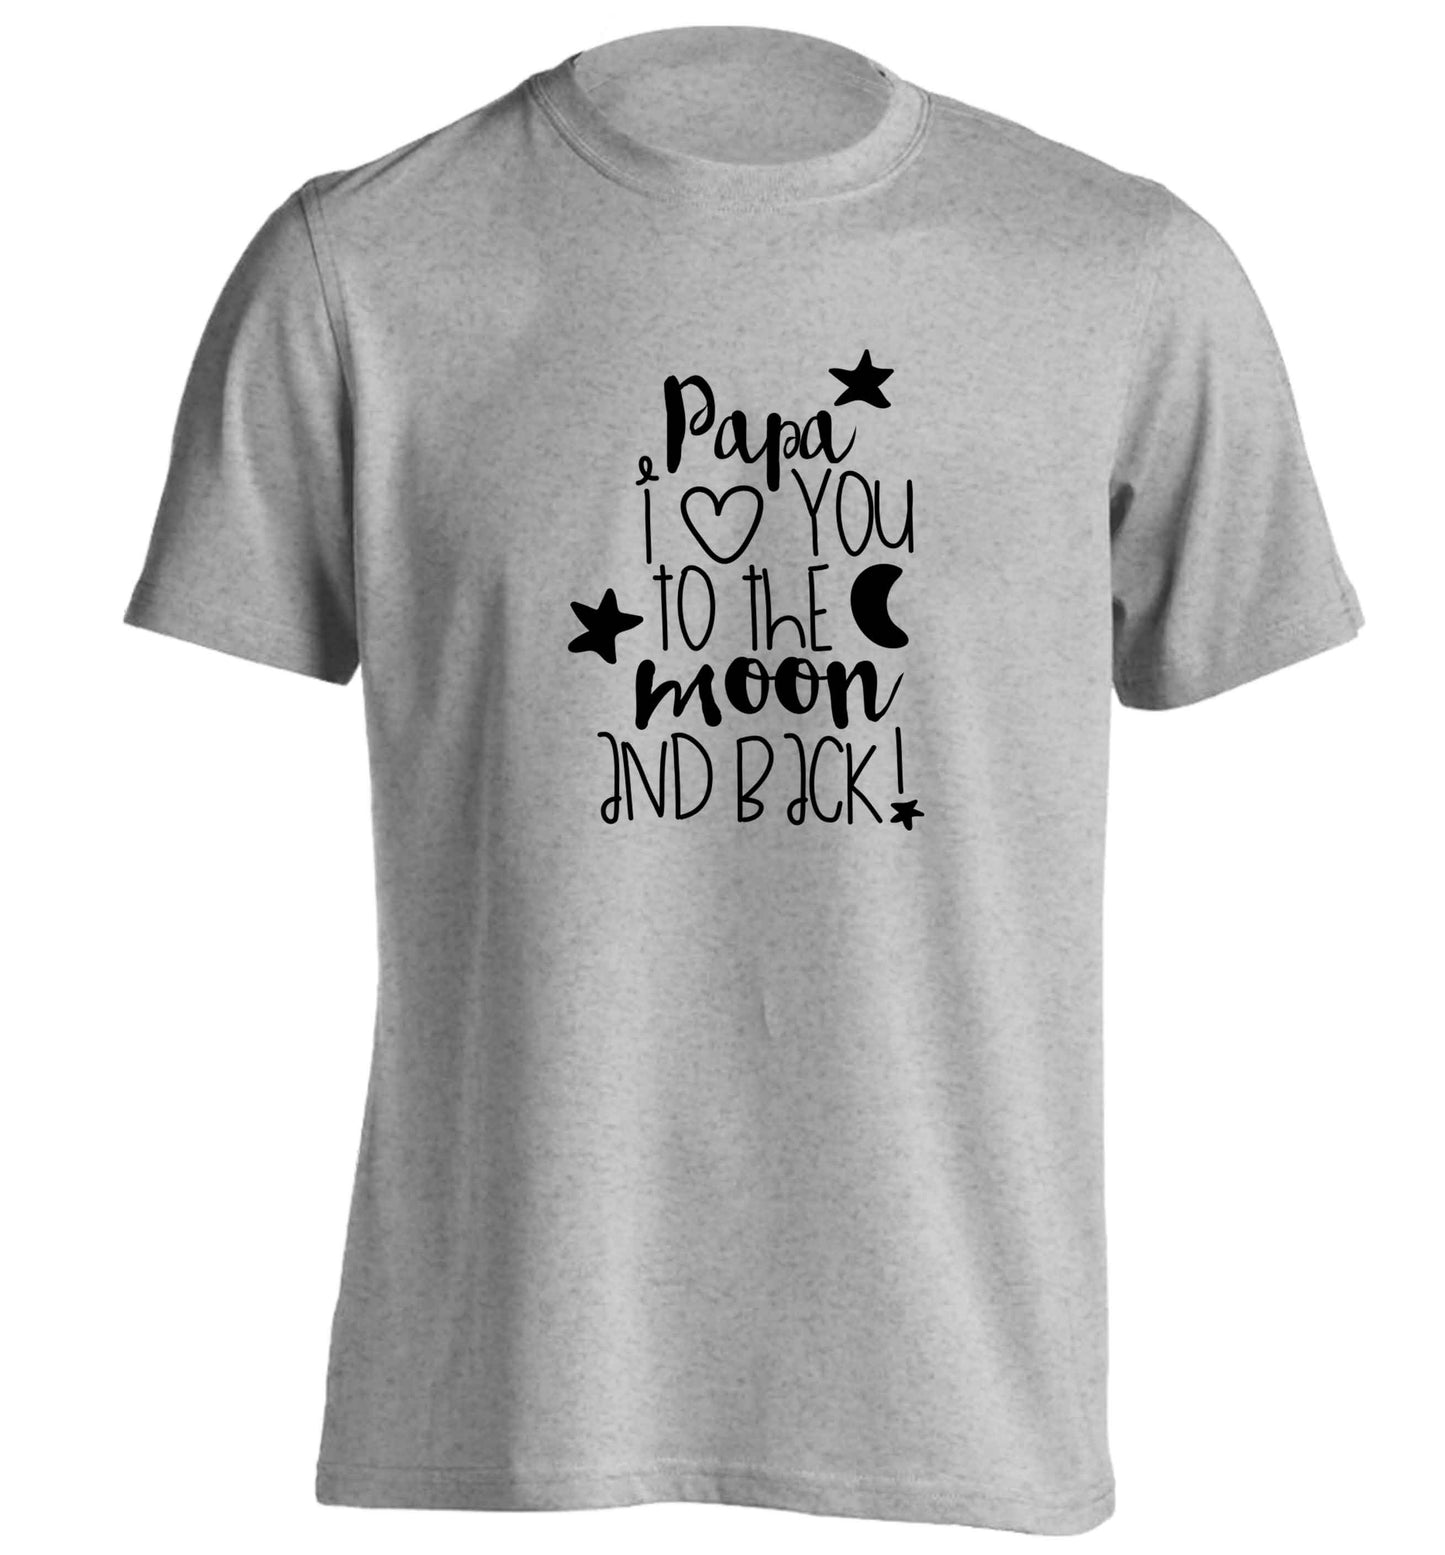 Papa I love you to the moon and back adults unisex grey Tshirt 2XL